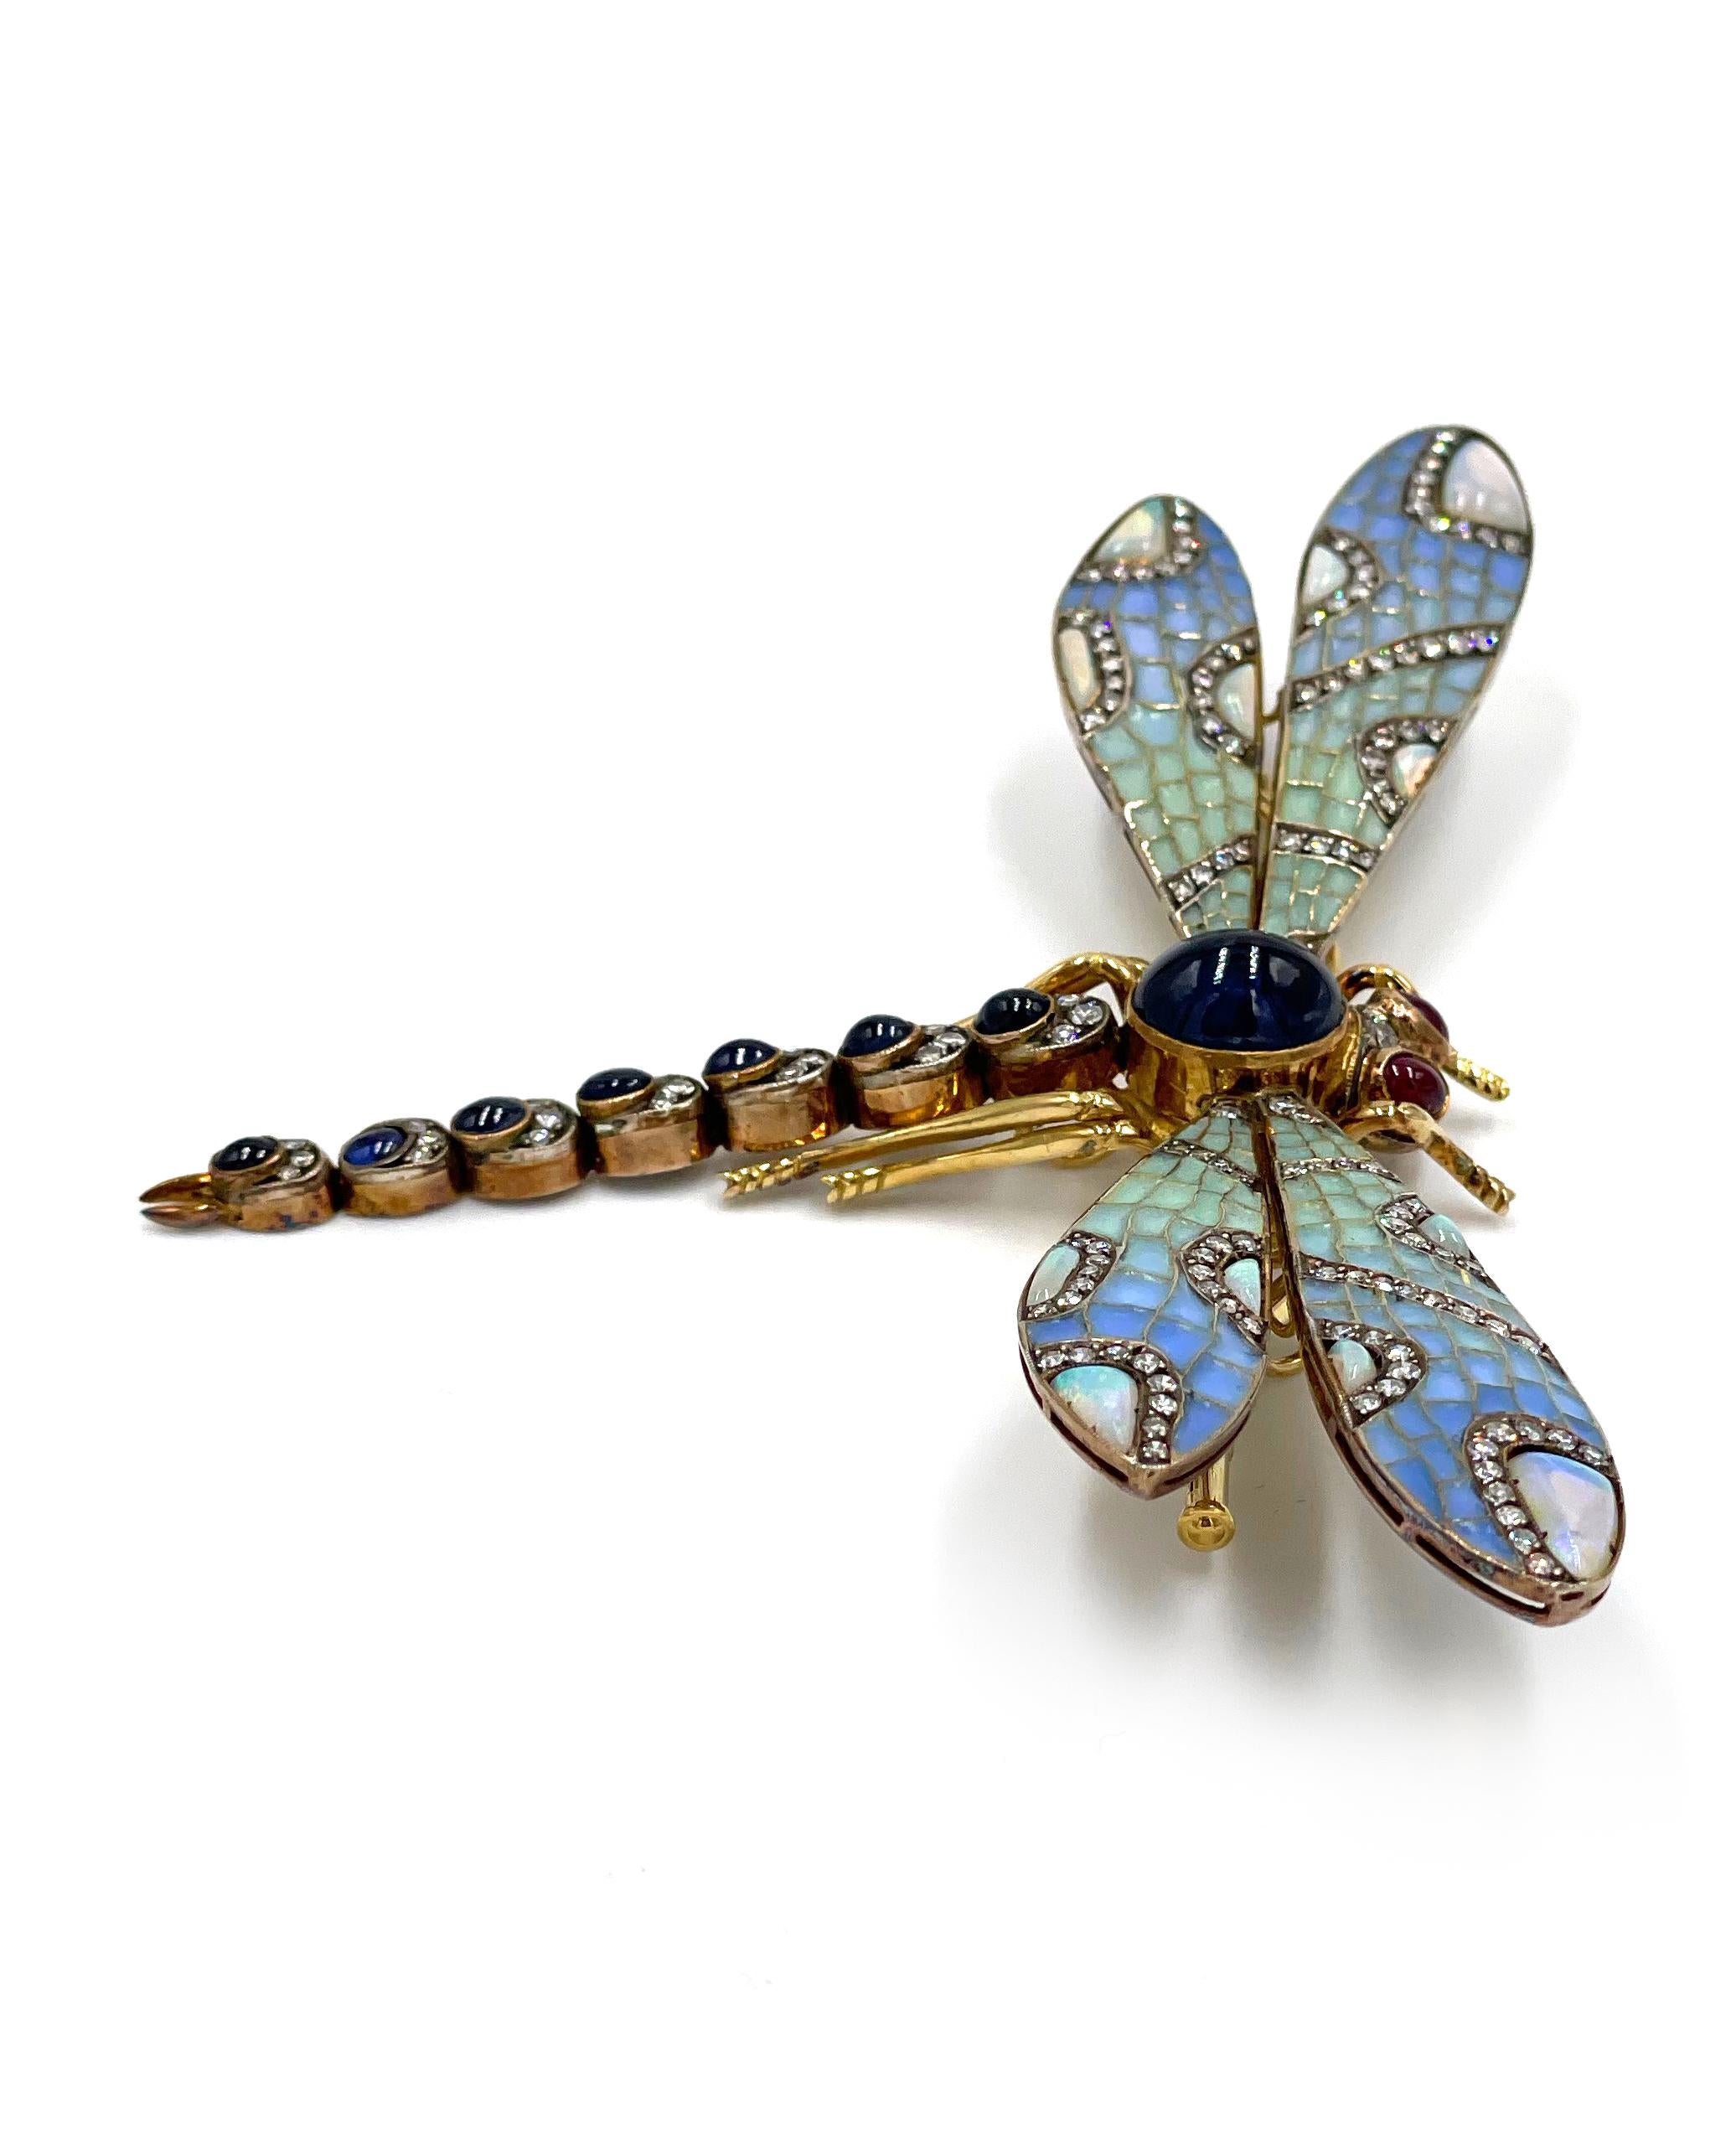 Antique 18K Dragonfly Brooch, Circa 1880-1910 In Good Condition For Sale In Old Tappan, NJ